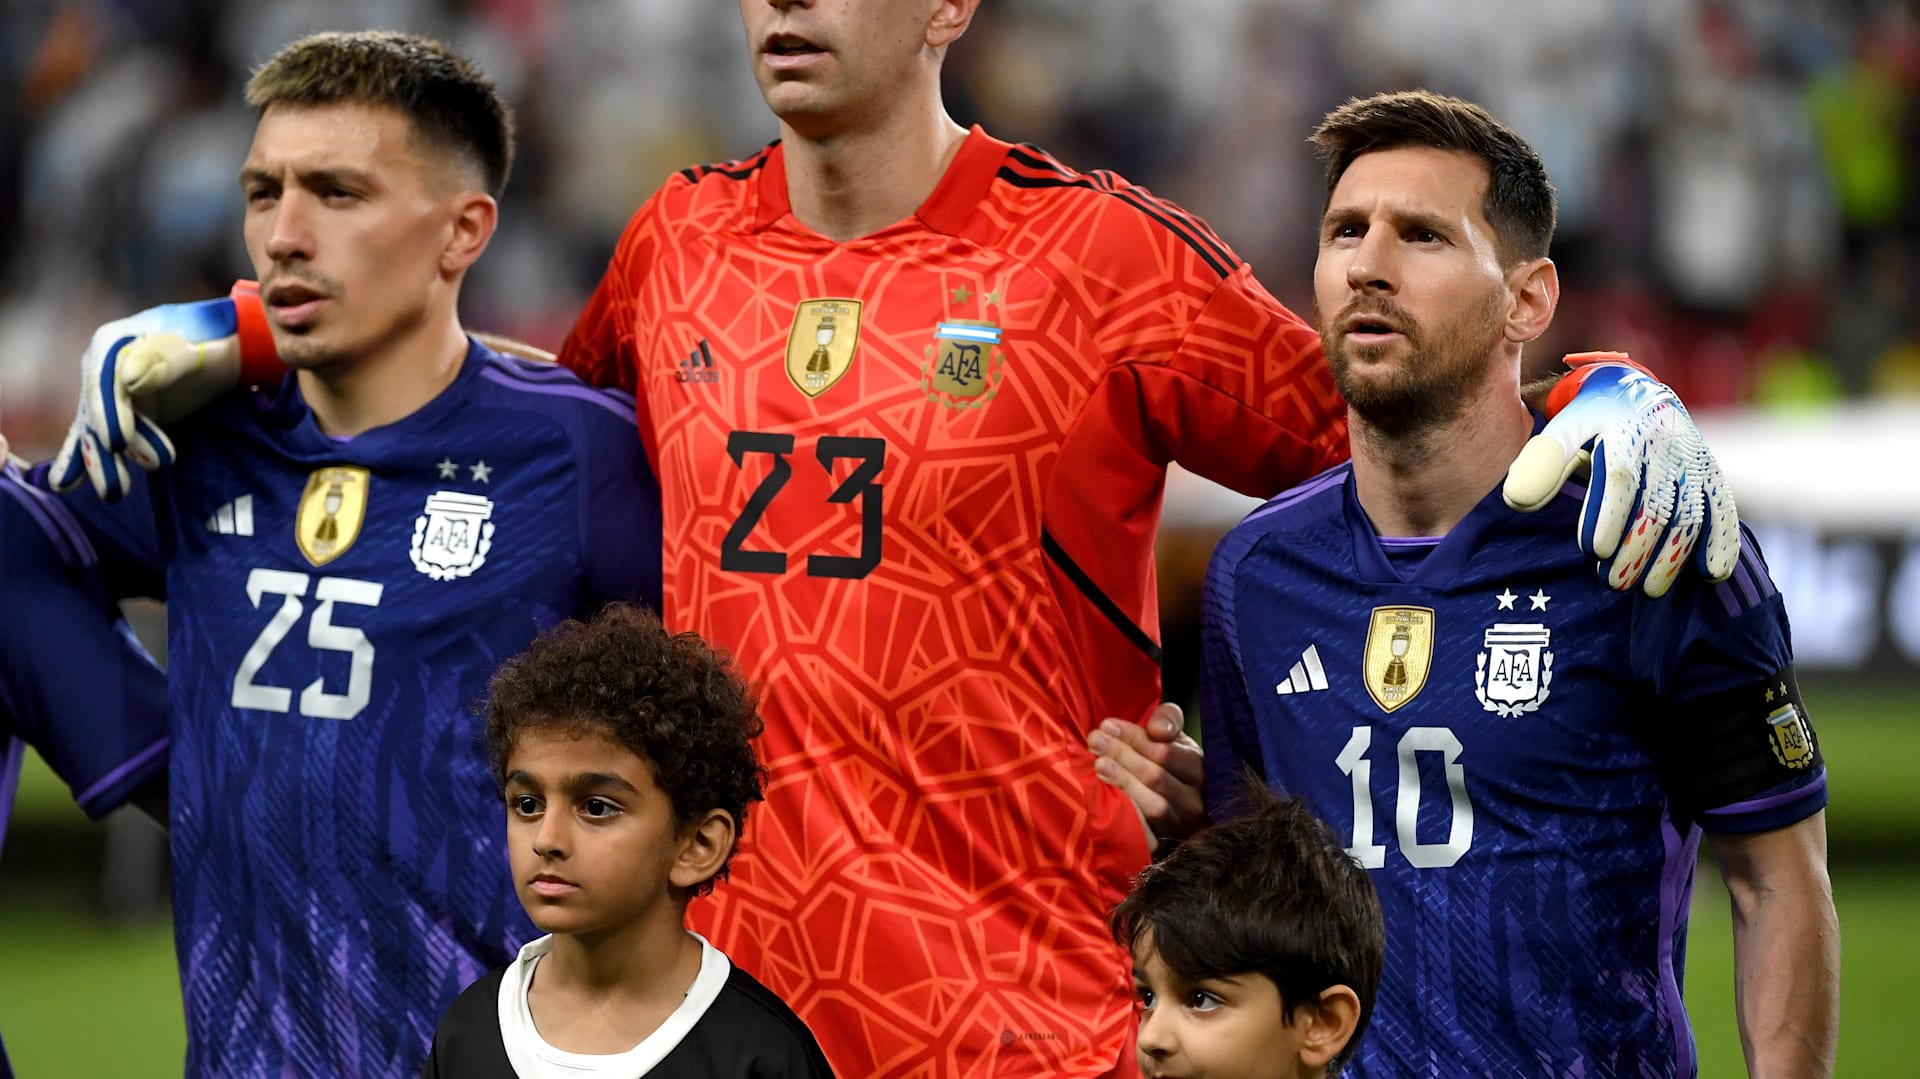 Clubs from Italy, Germany, Spain and England Unveil New Kits for